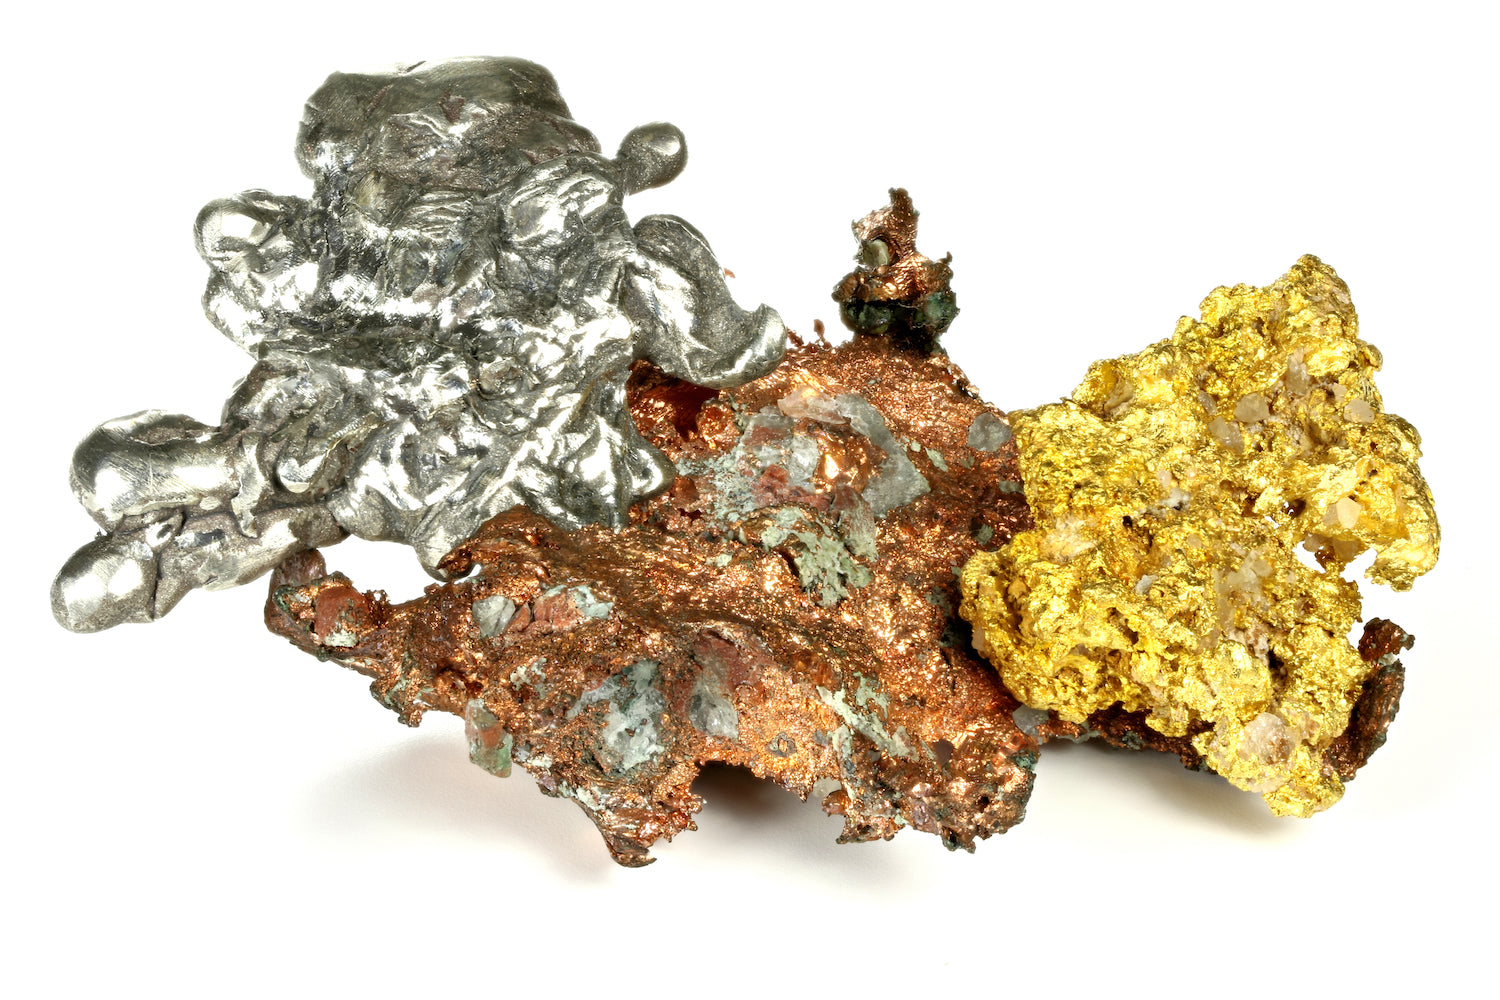 Which Metal Works Best in Anti-Bacterial Sheets? Copper vs Silver vs Zinc